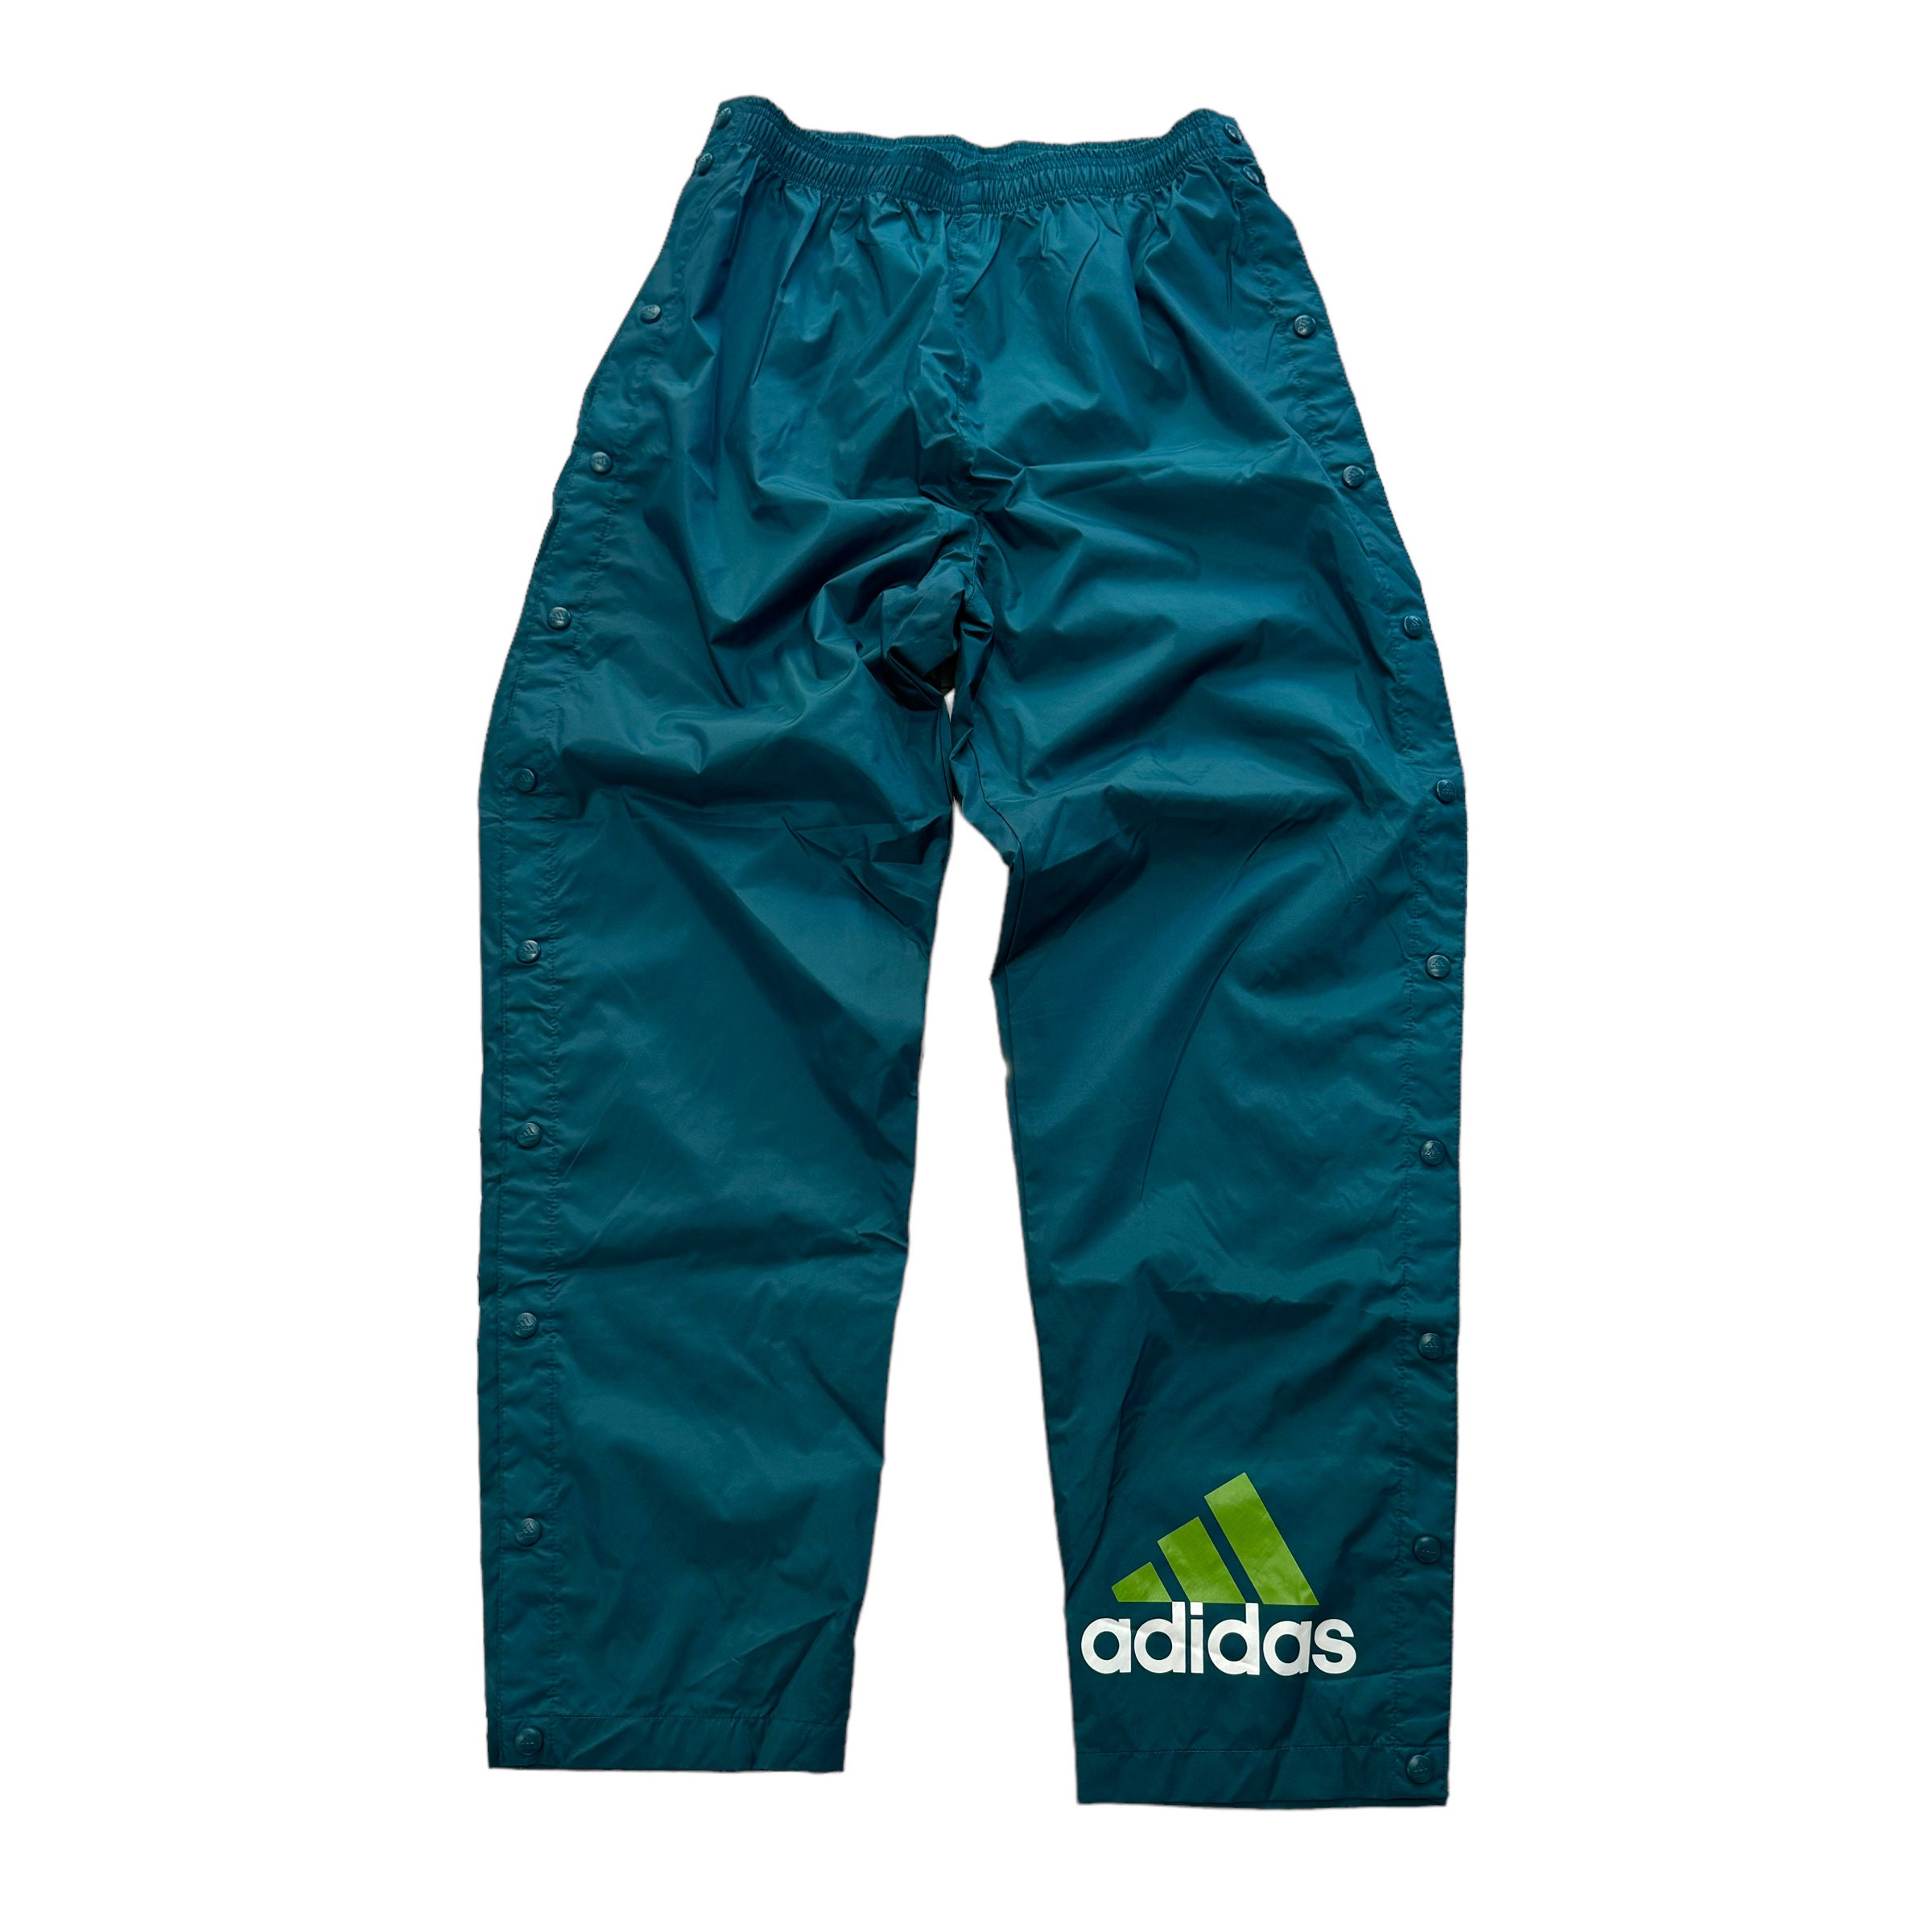 90s Adidas Tear Away Windbreaker Pants Size Large For $35! Direct